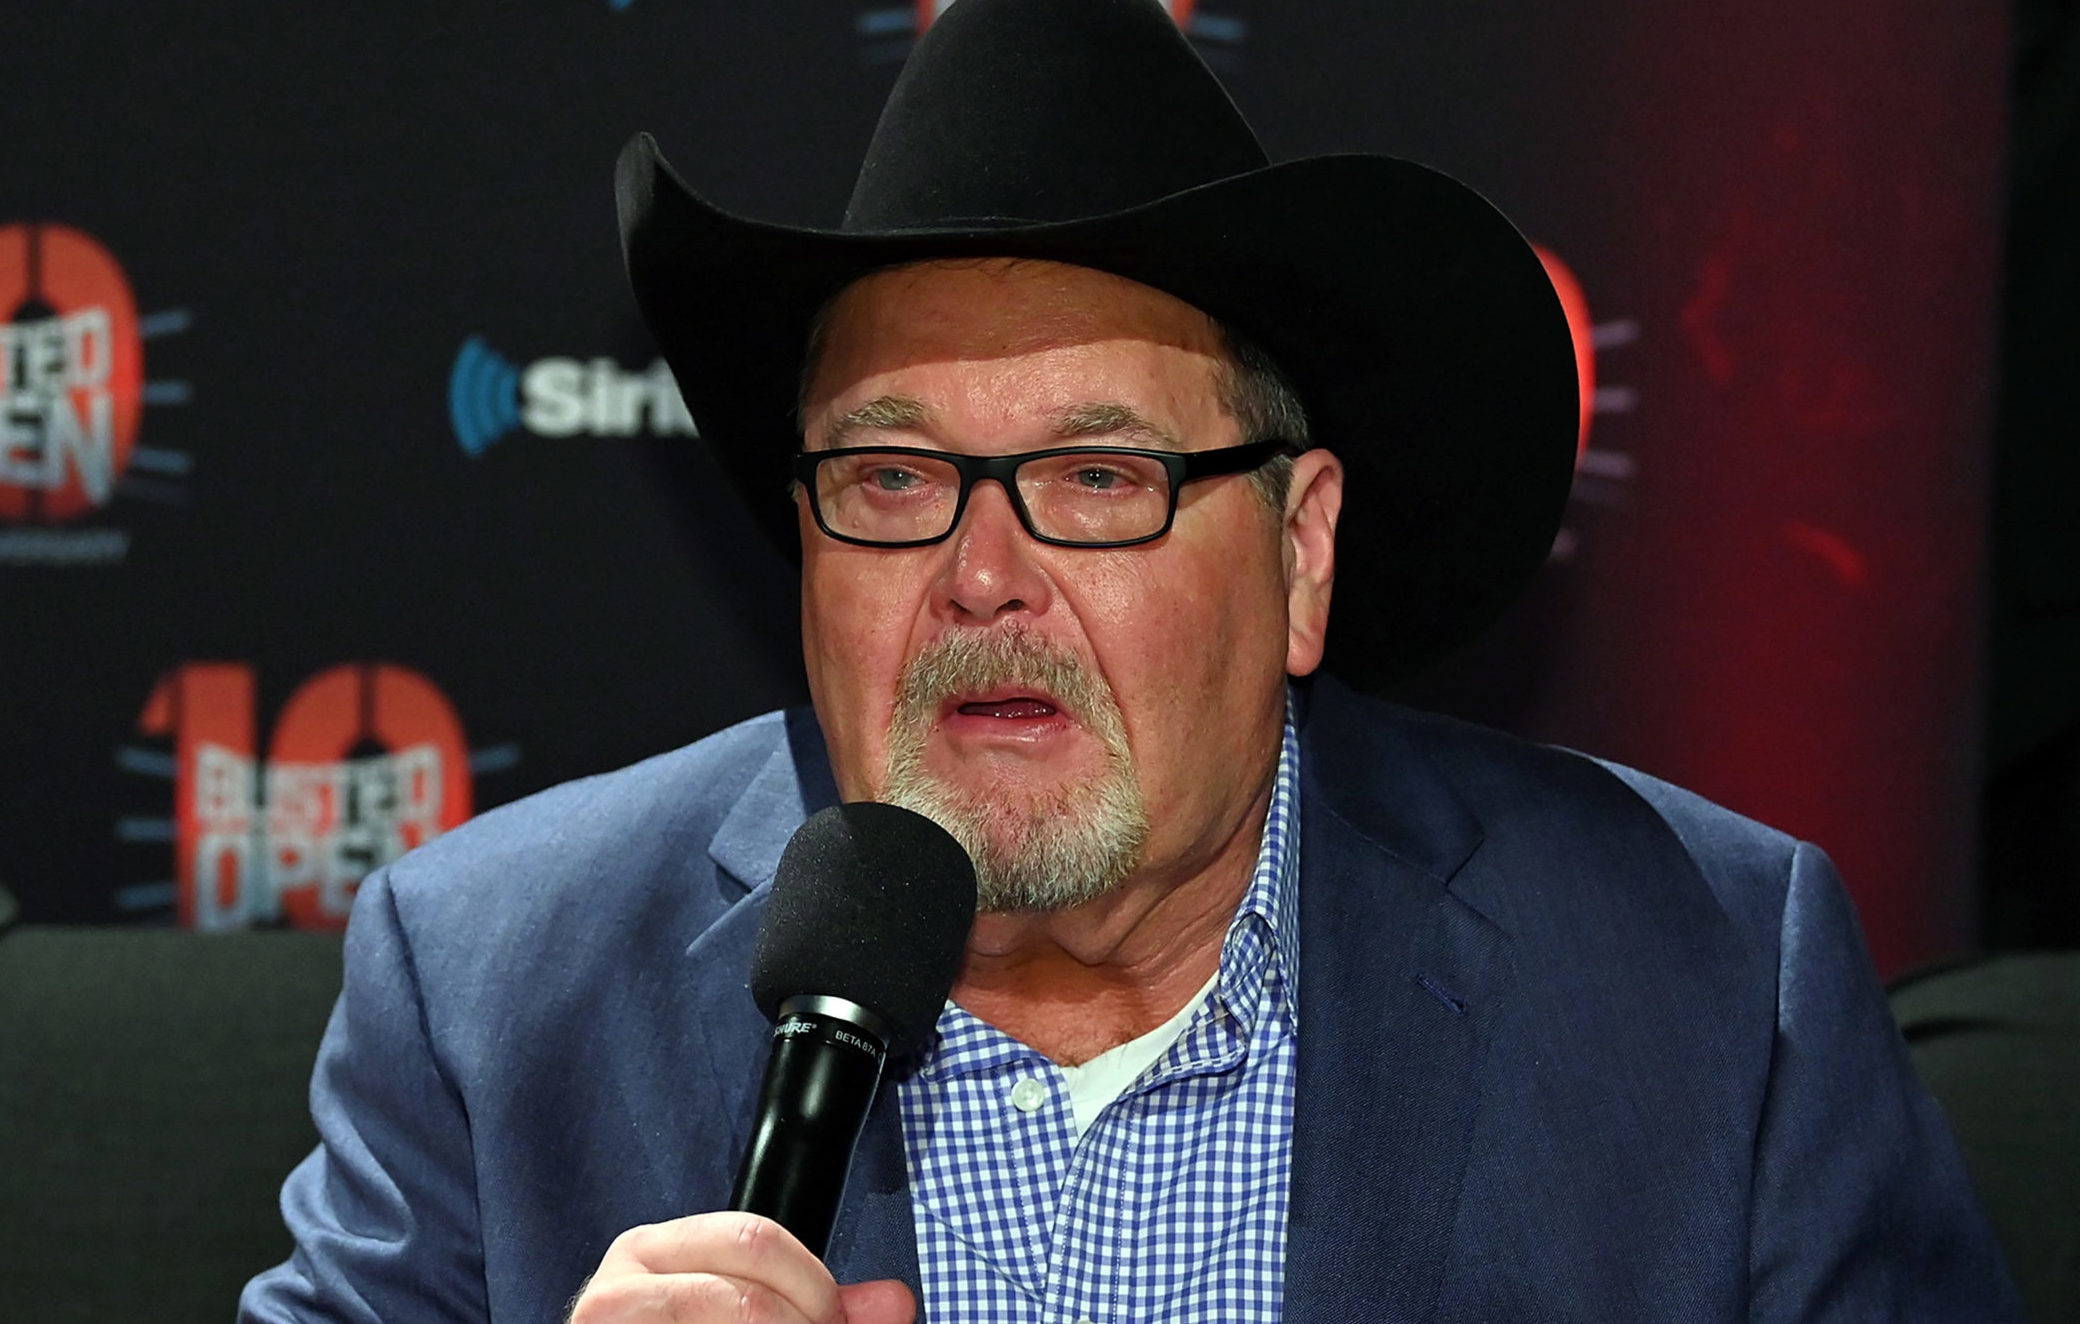 Jim Ross Applauds the High-Quality Wrestling and Praises Numerous Stars on AEW Collision